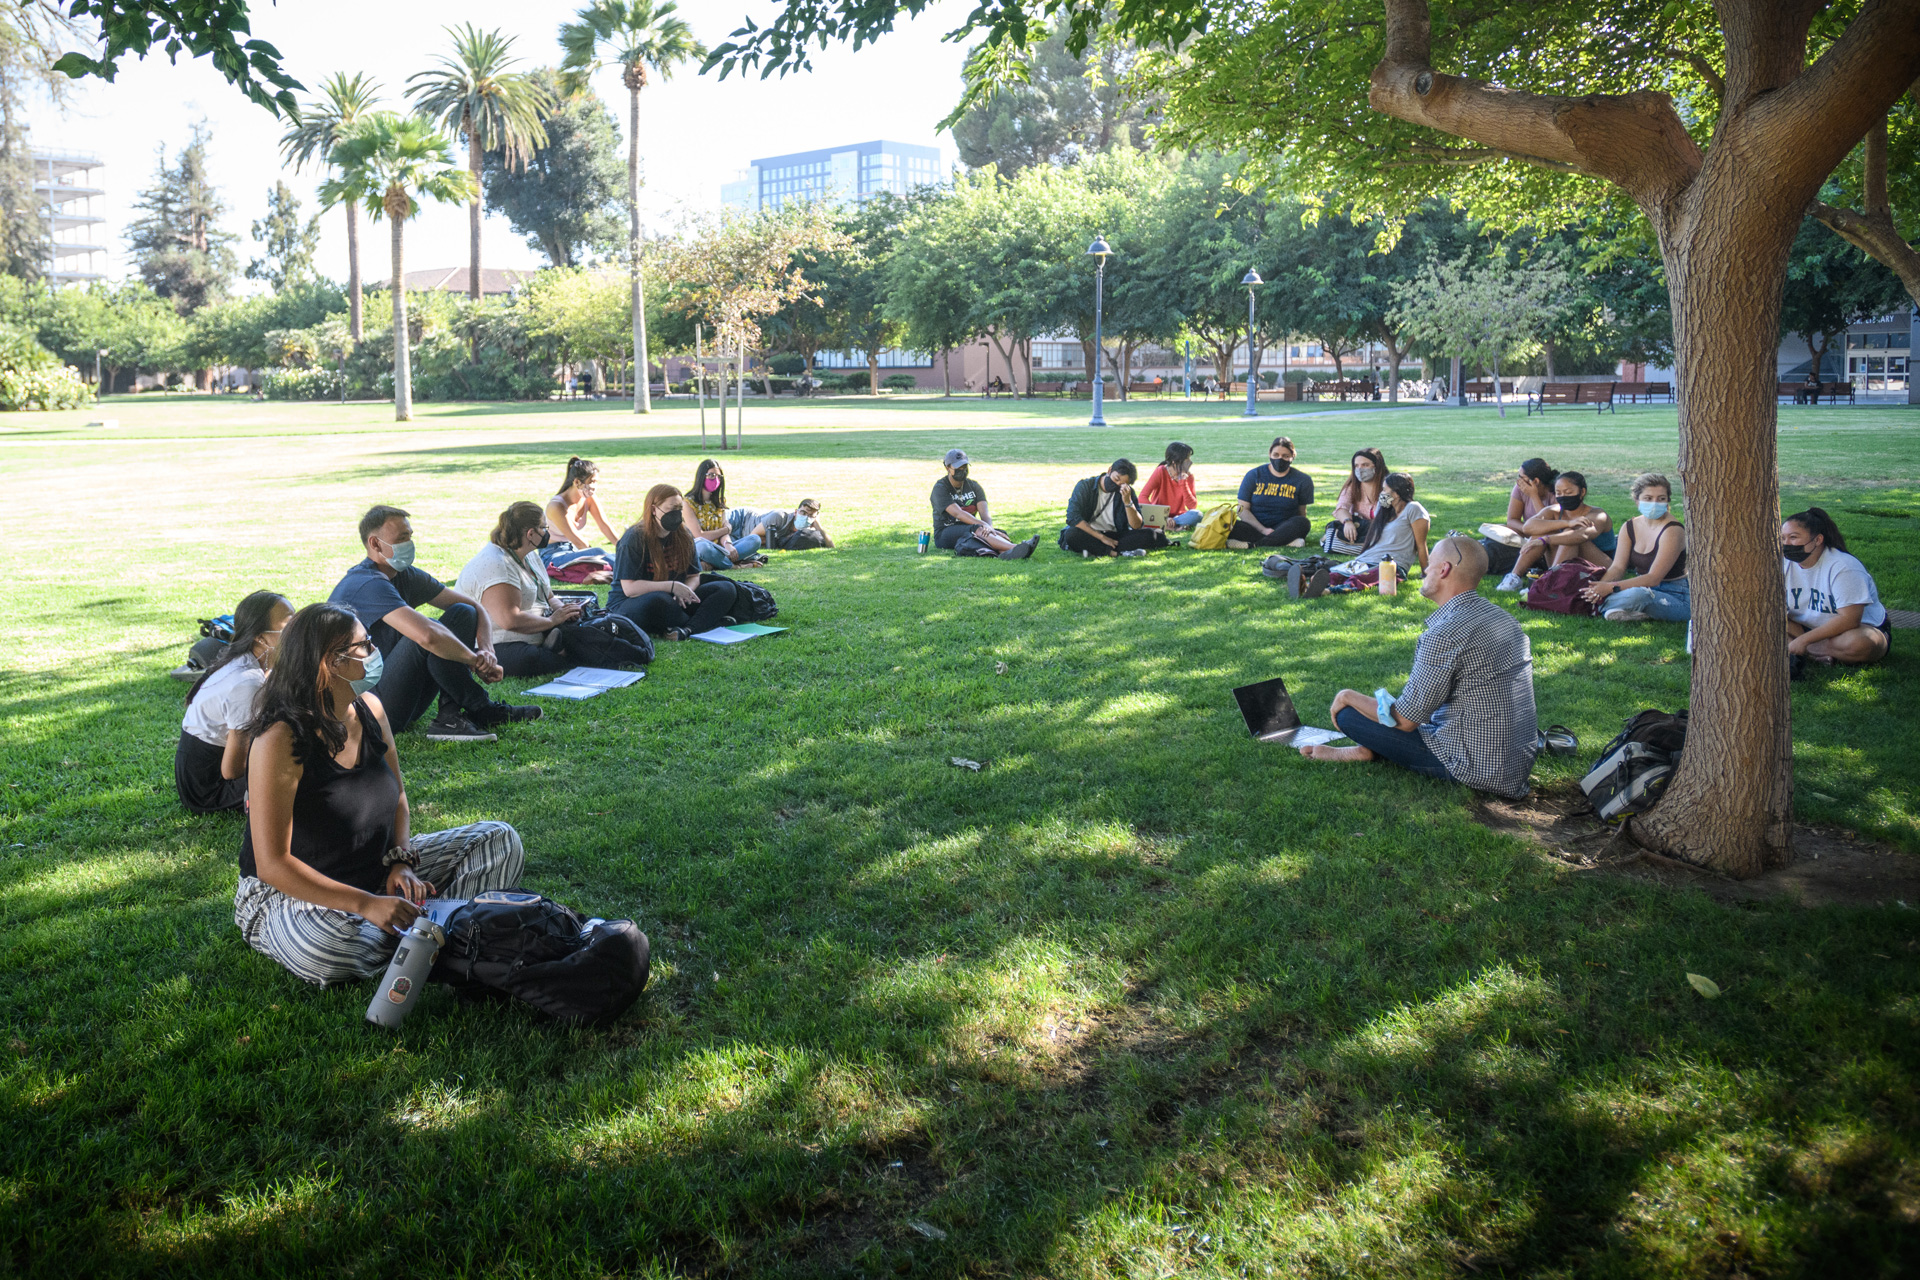 Students gathered together on the grass.